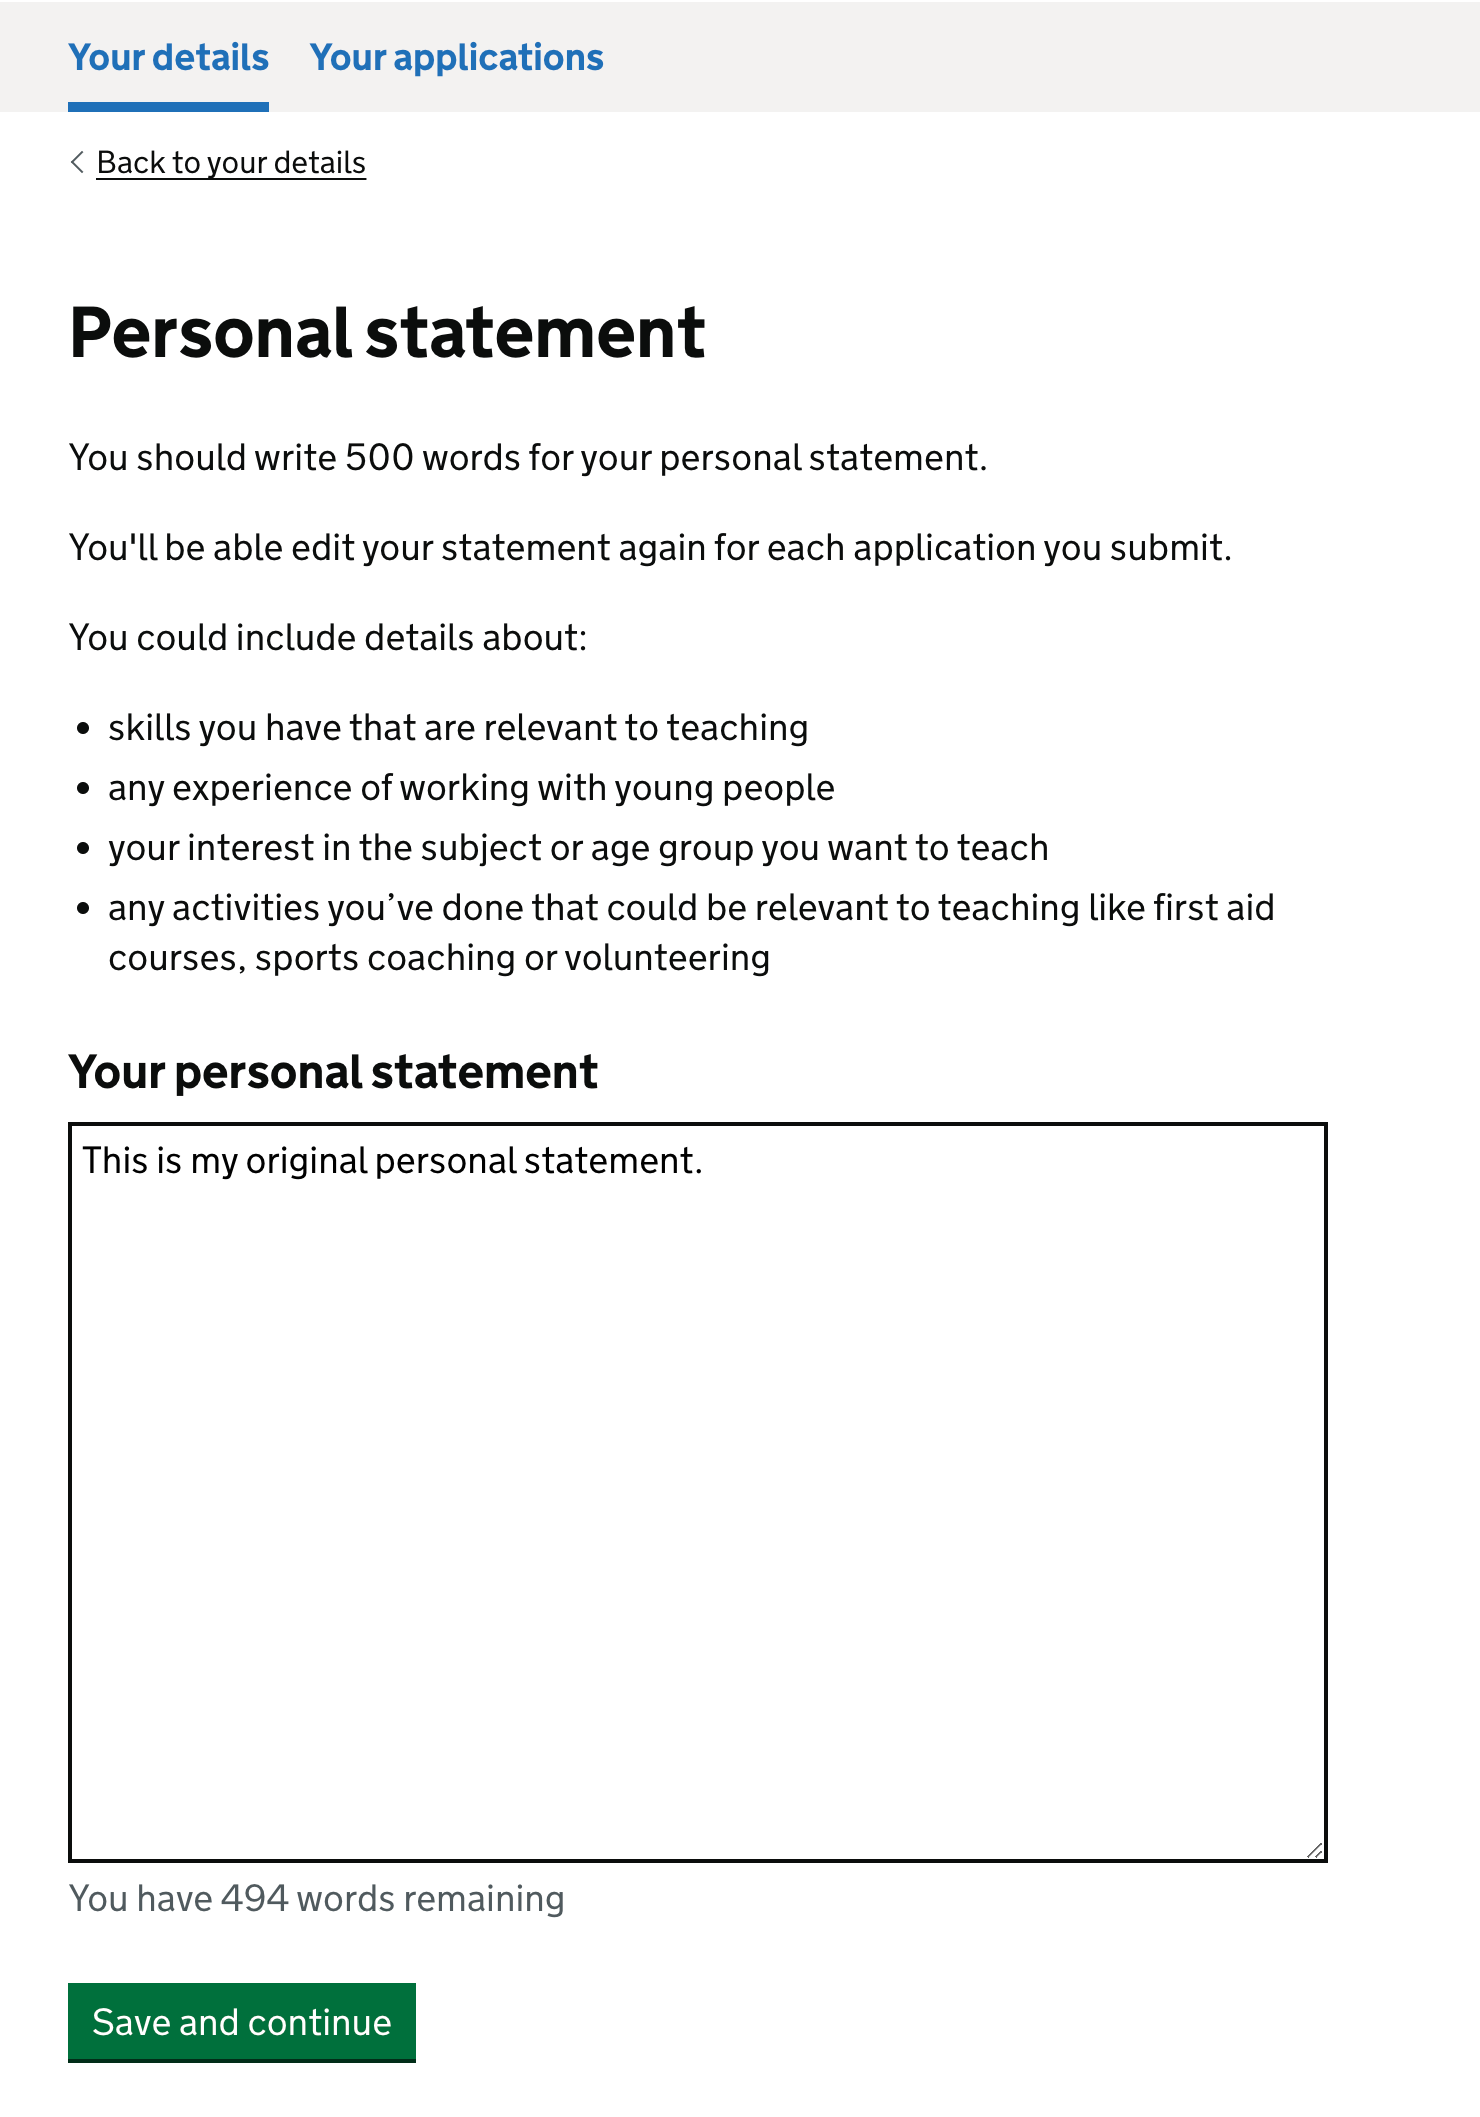 Screenshot showing the personal statement question where the candidate can write their 'master' version of their statement.